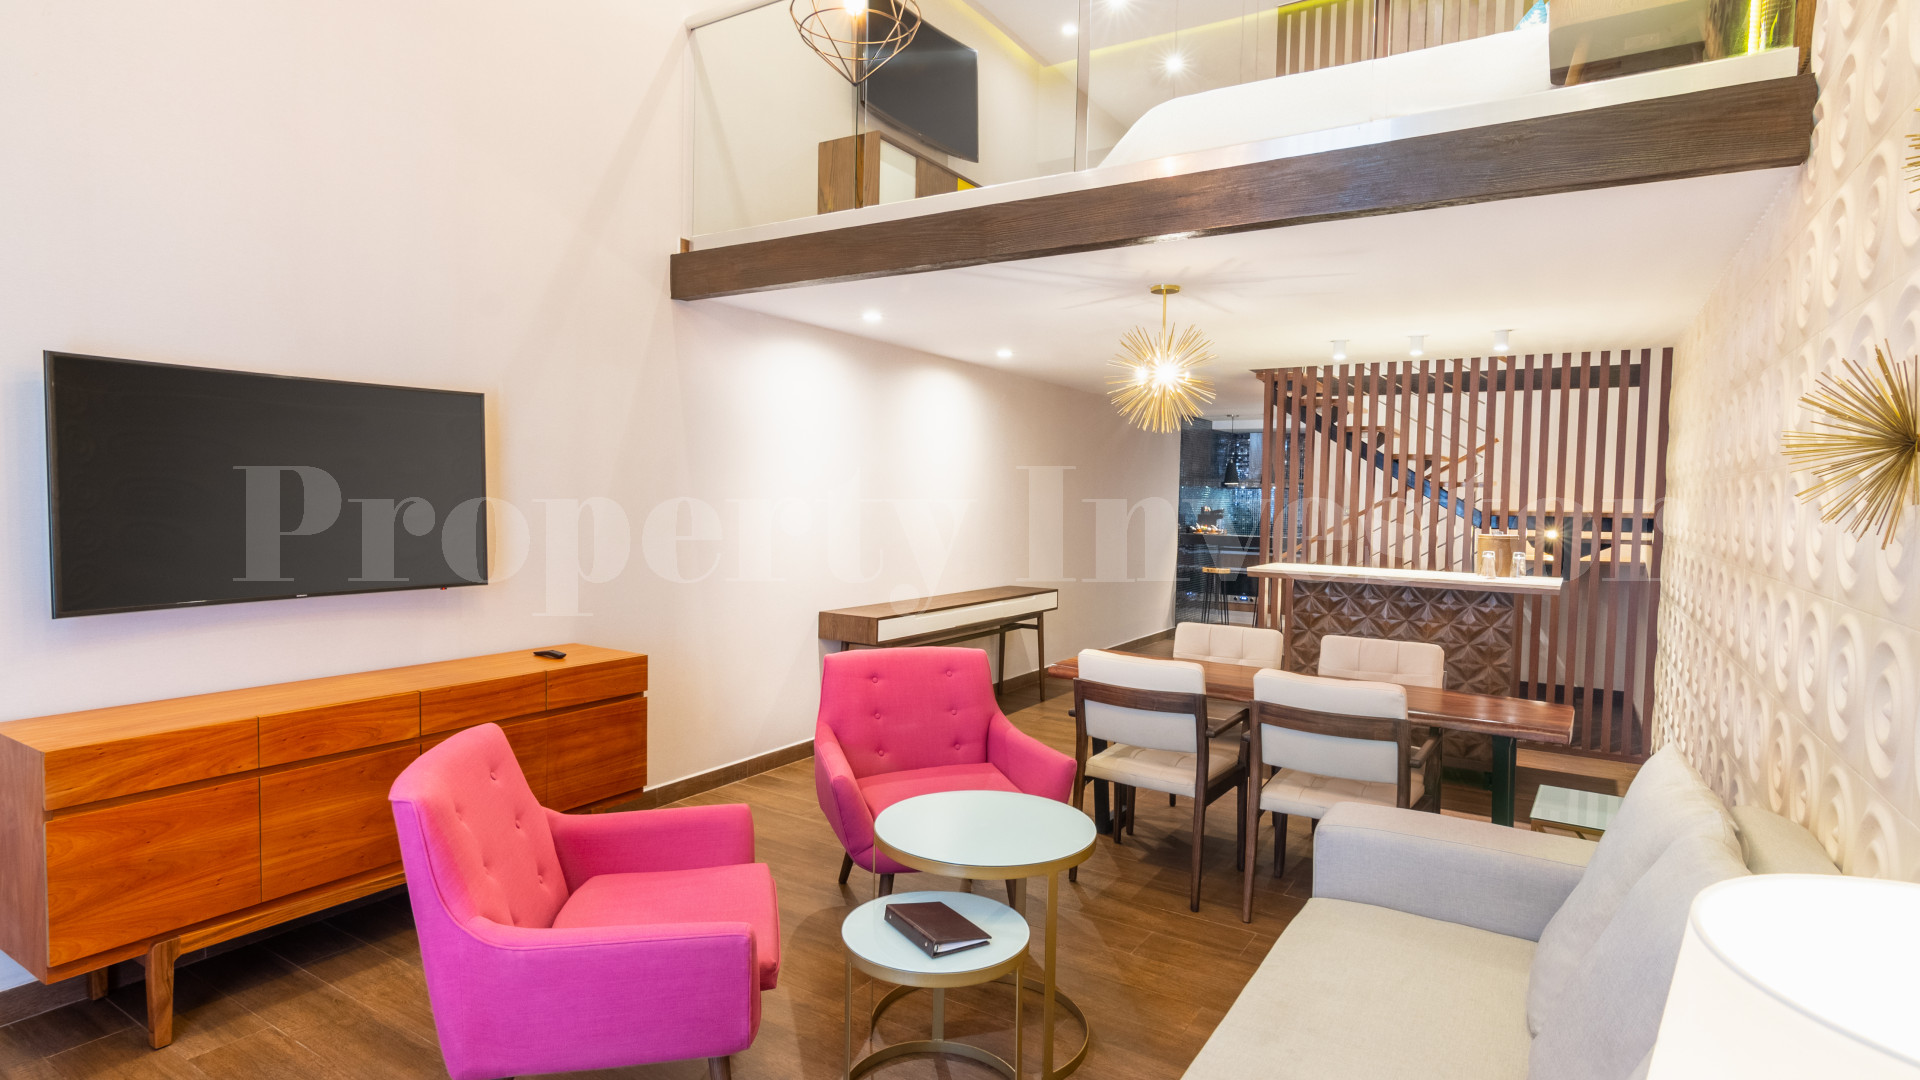 Exclusive 1 Bedroom Boutique Hotel Investment in Playa del Carmen (Unit 399)